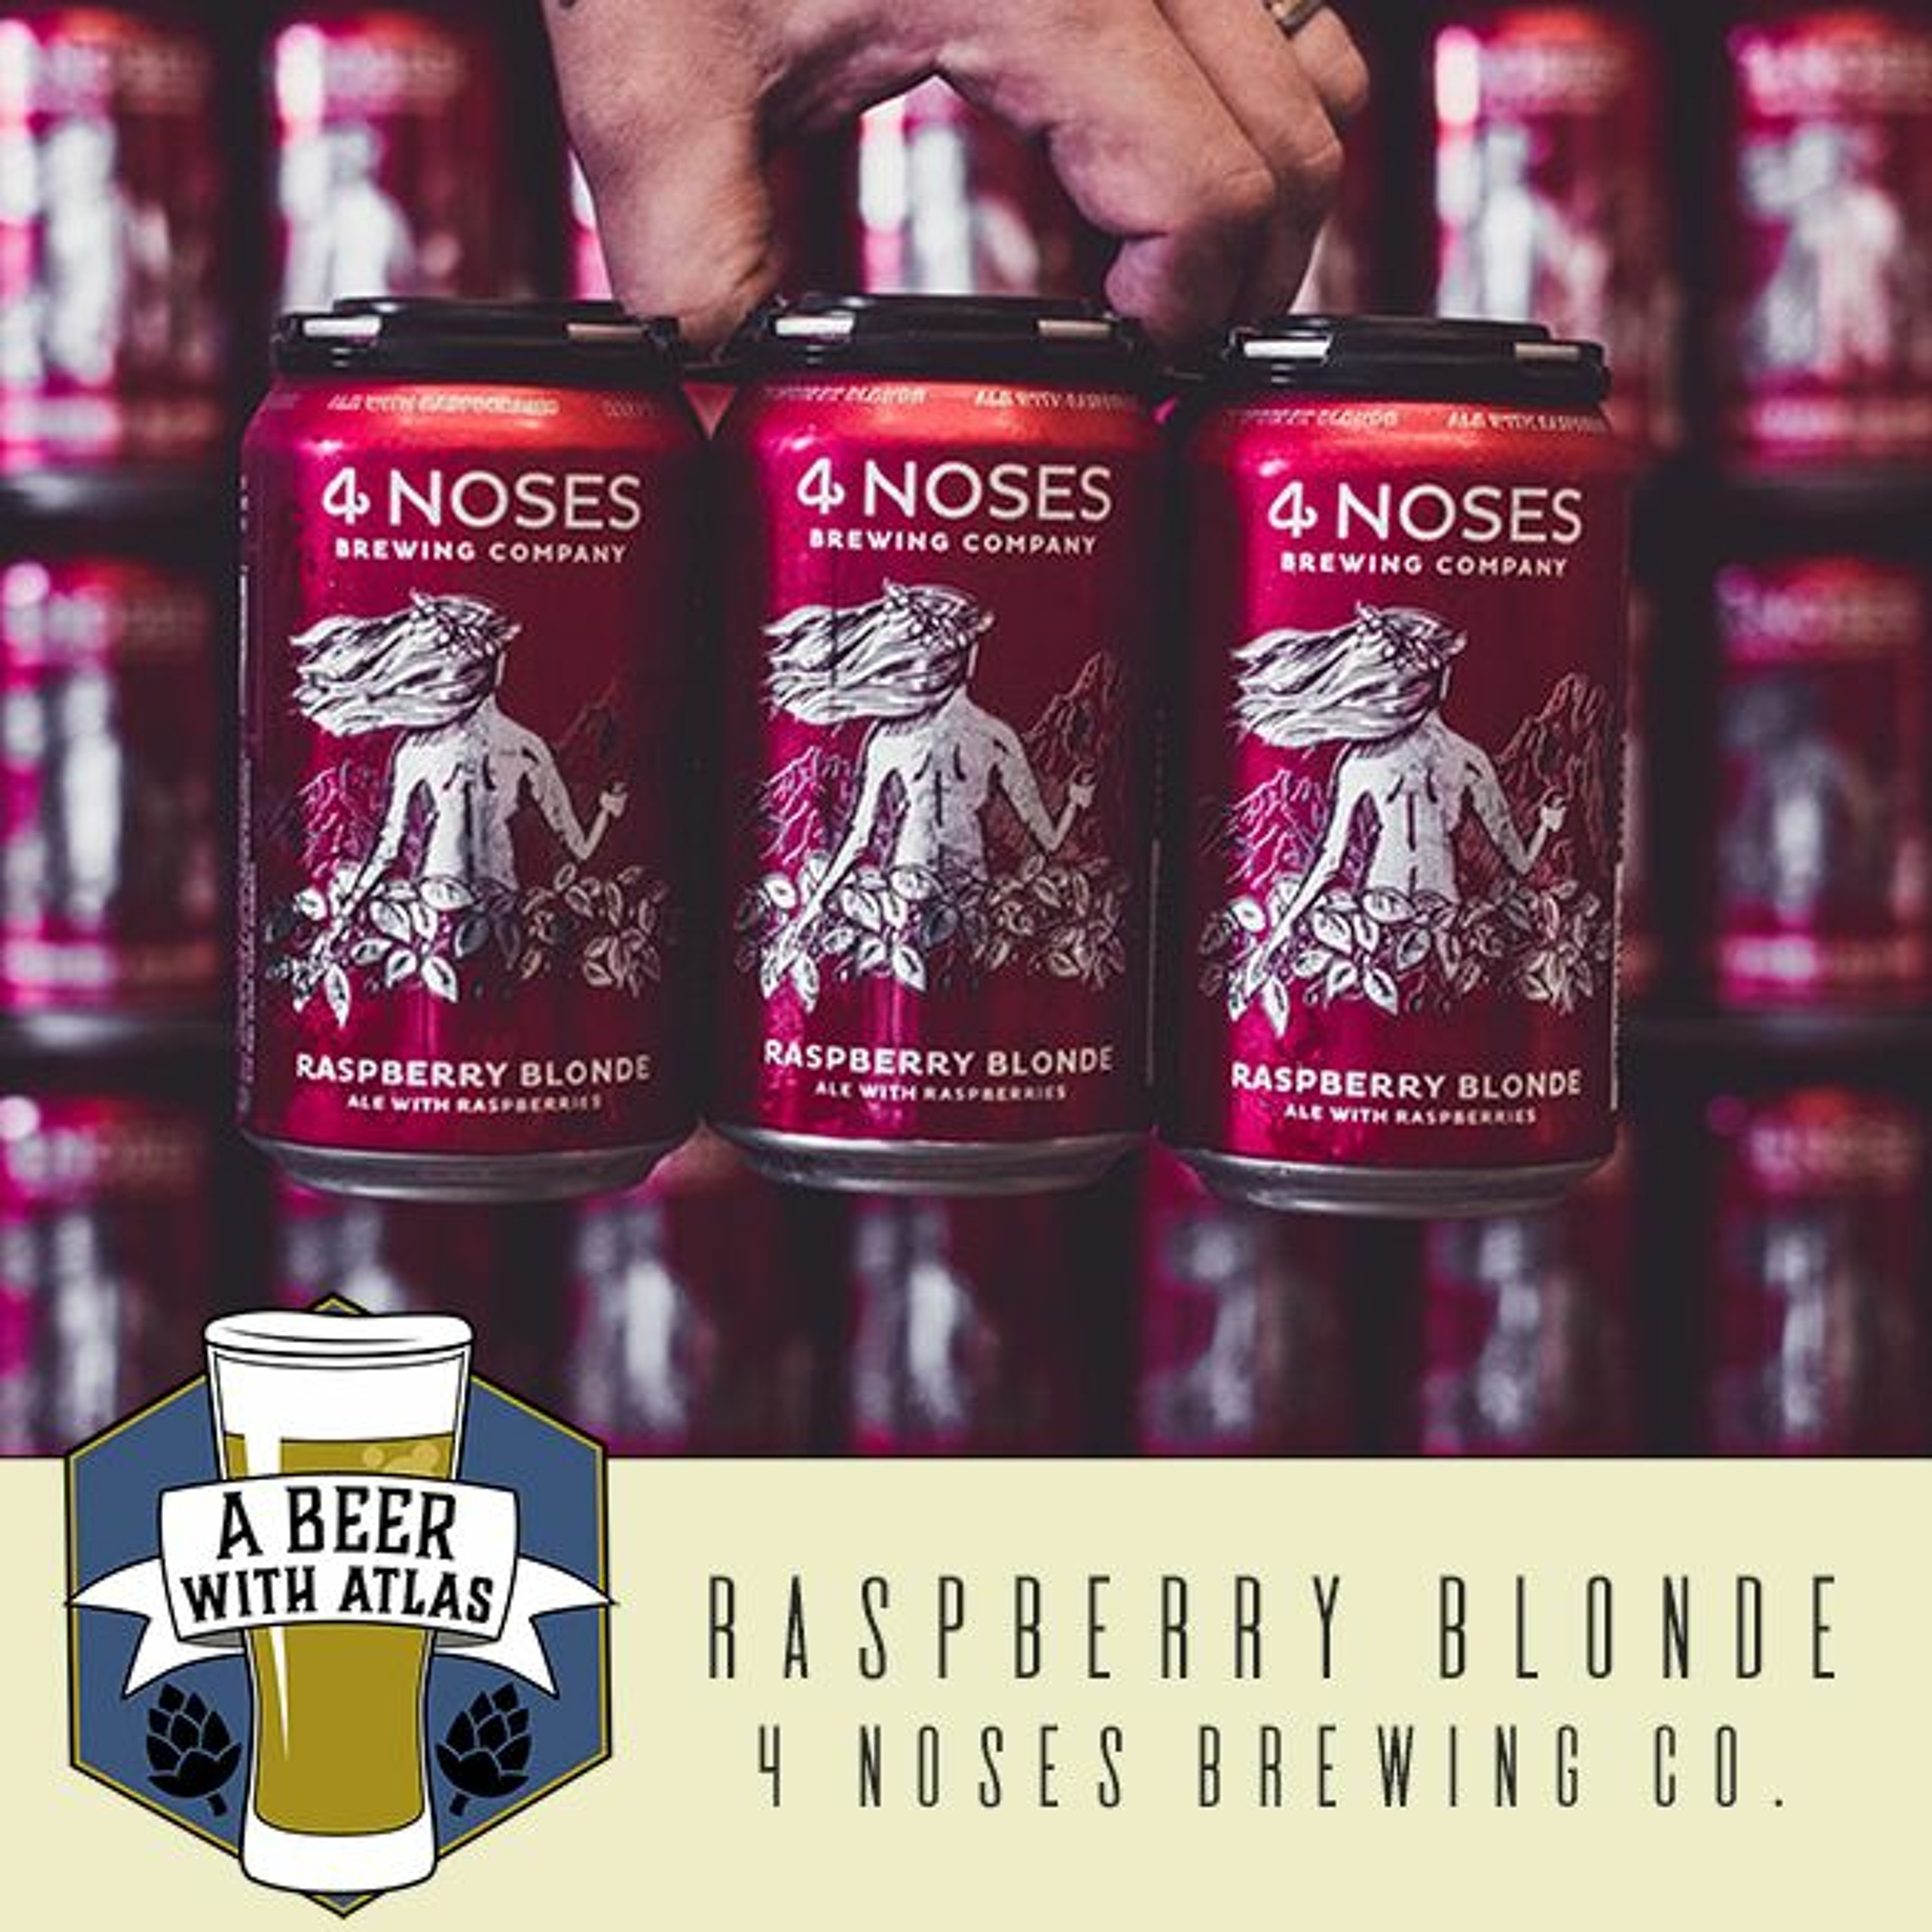 Raspberry Blonde from 4 Noses Brewing Co. - Beer With Atlas 104